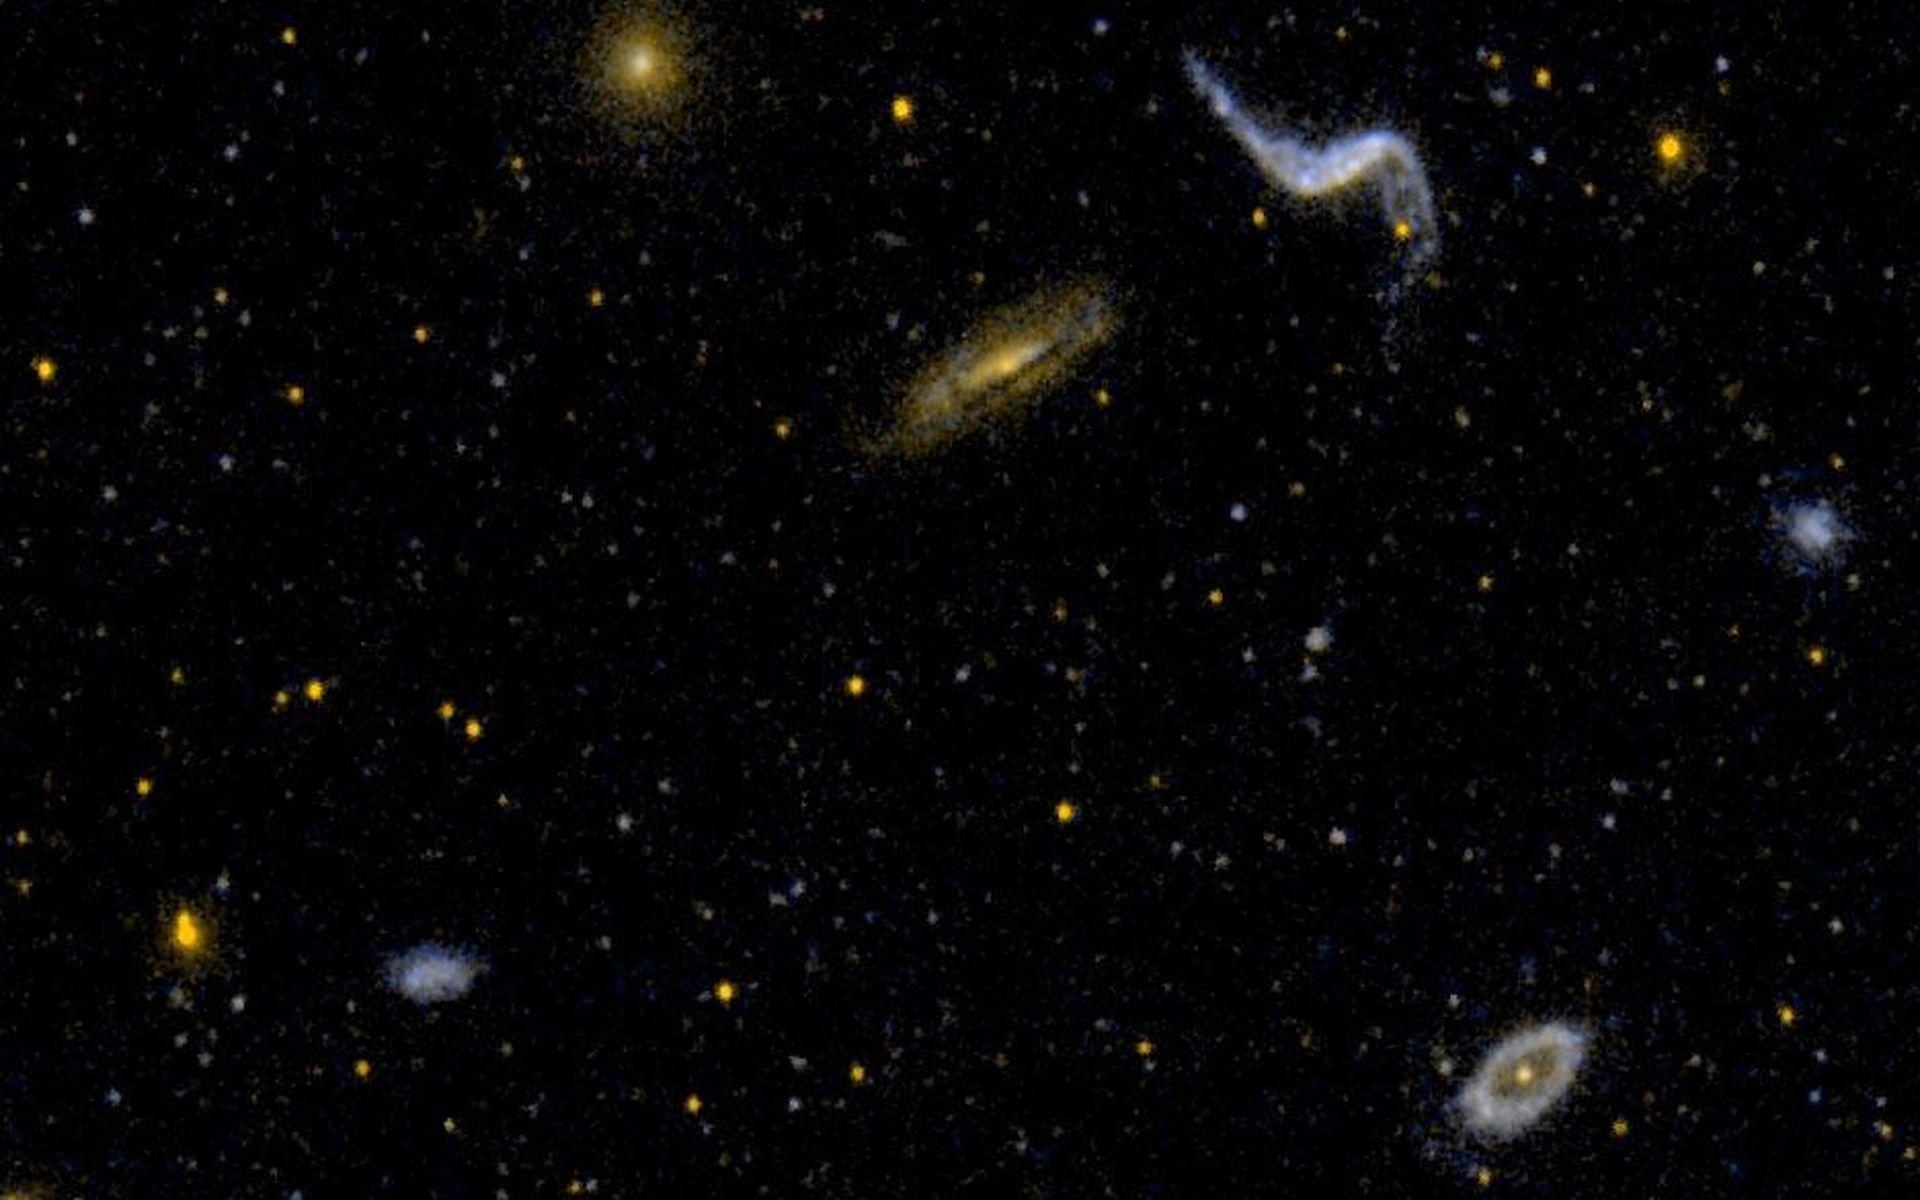 Space Image. Diverse Group of Galaxy Types, NGC 3190 Field